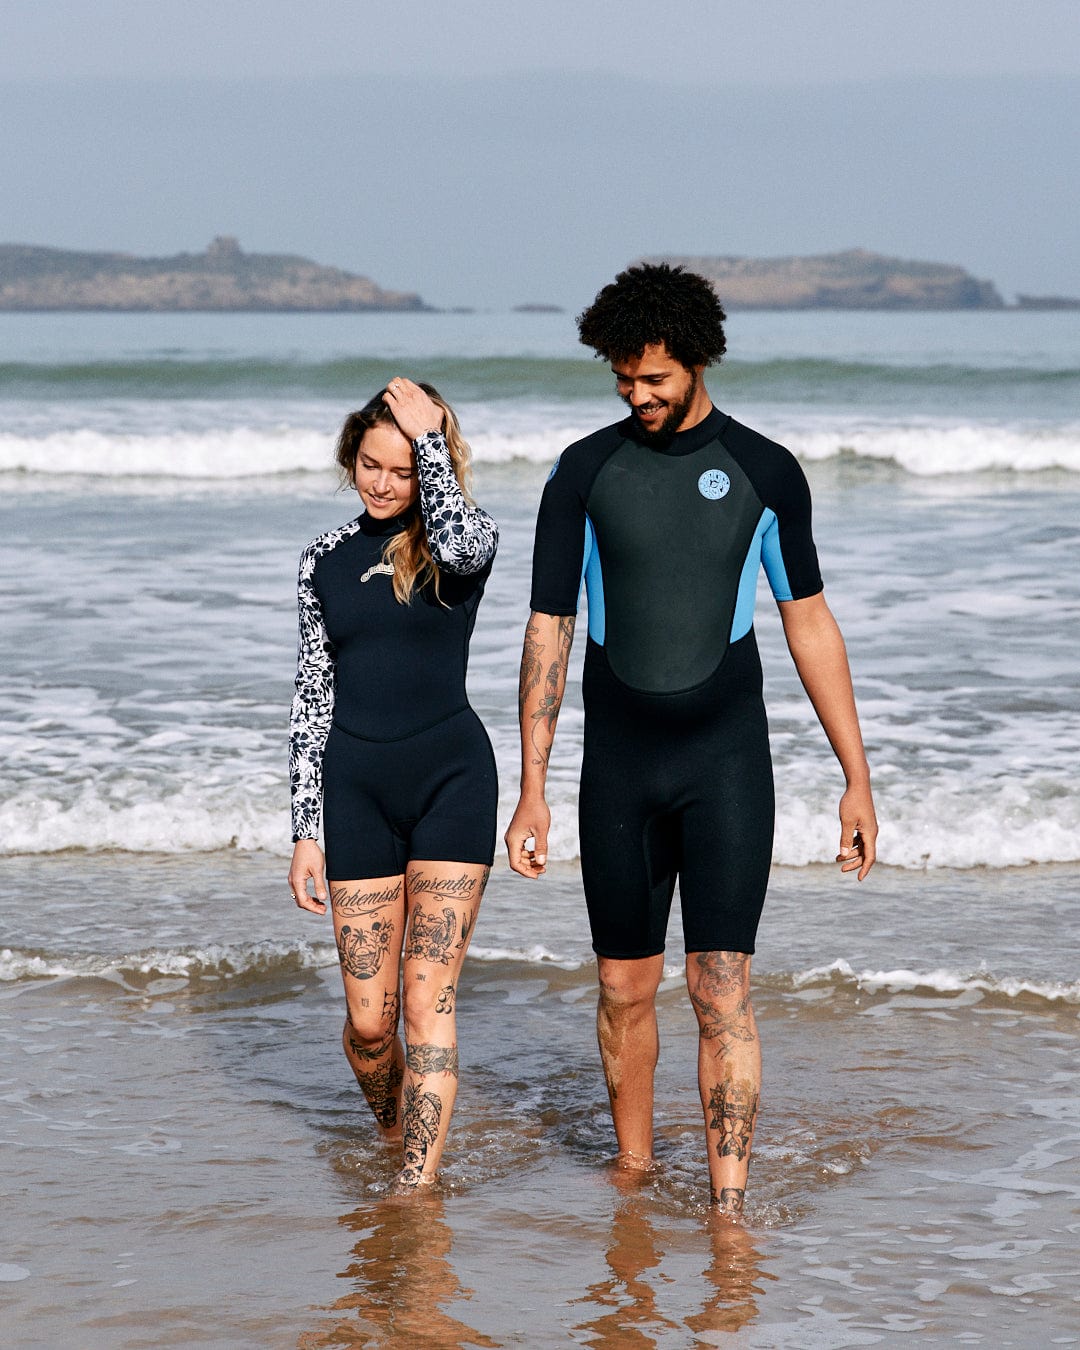 A man and a woman in Saltrock neoprene wetsuits with visible tattoos walking on a beach, with the ocean and a distant island in the background.